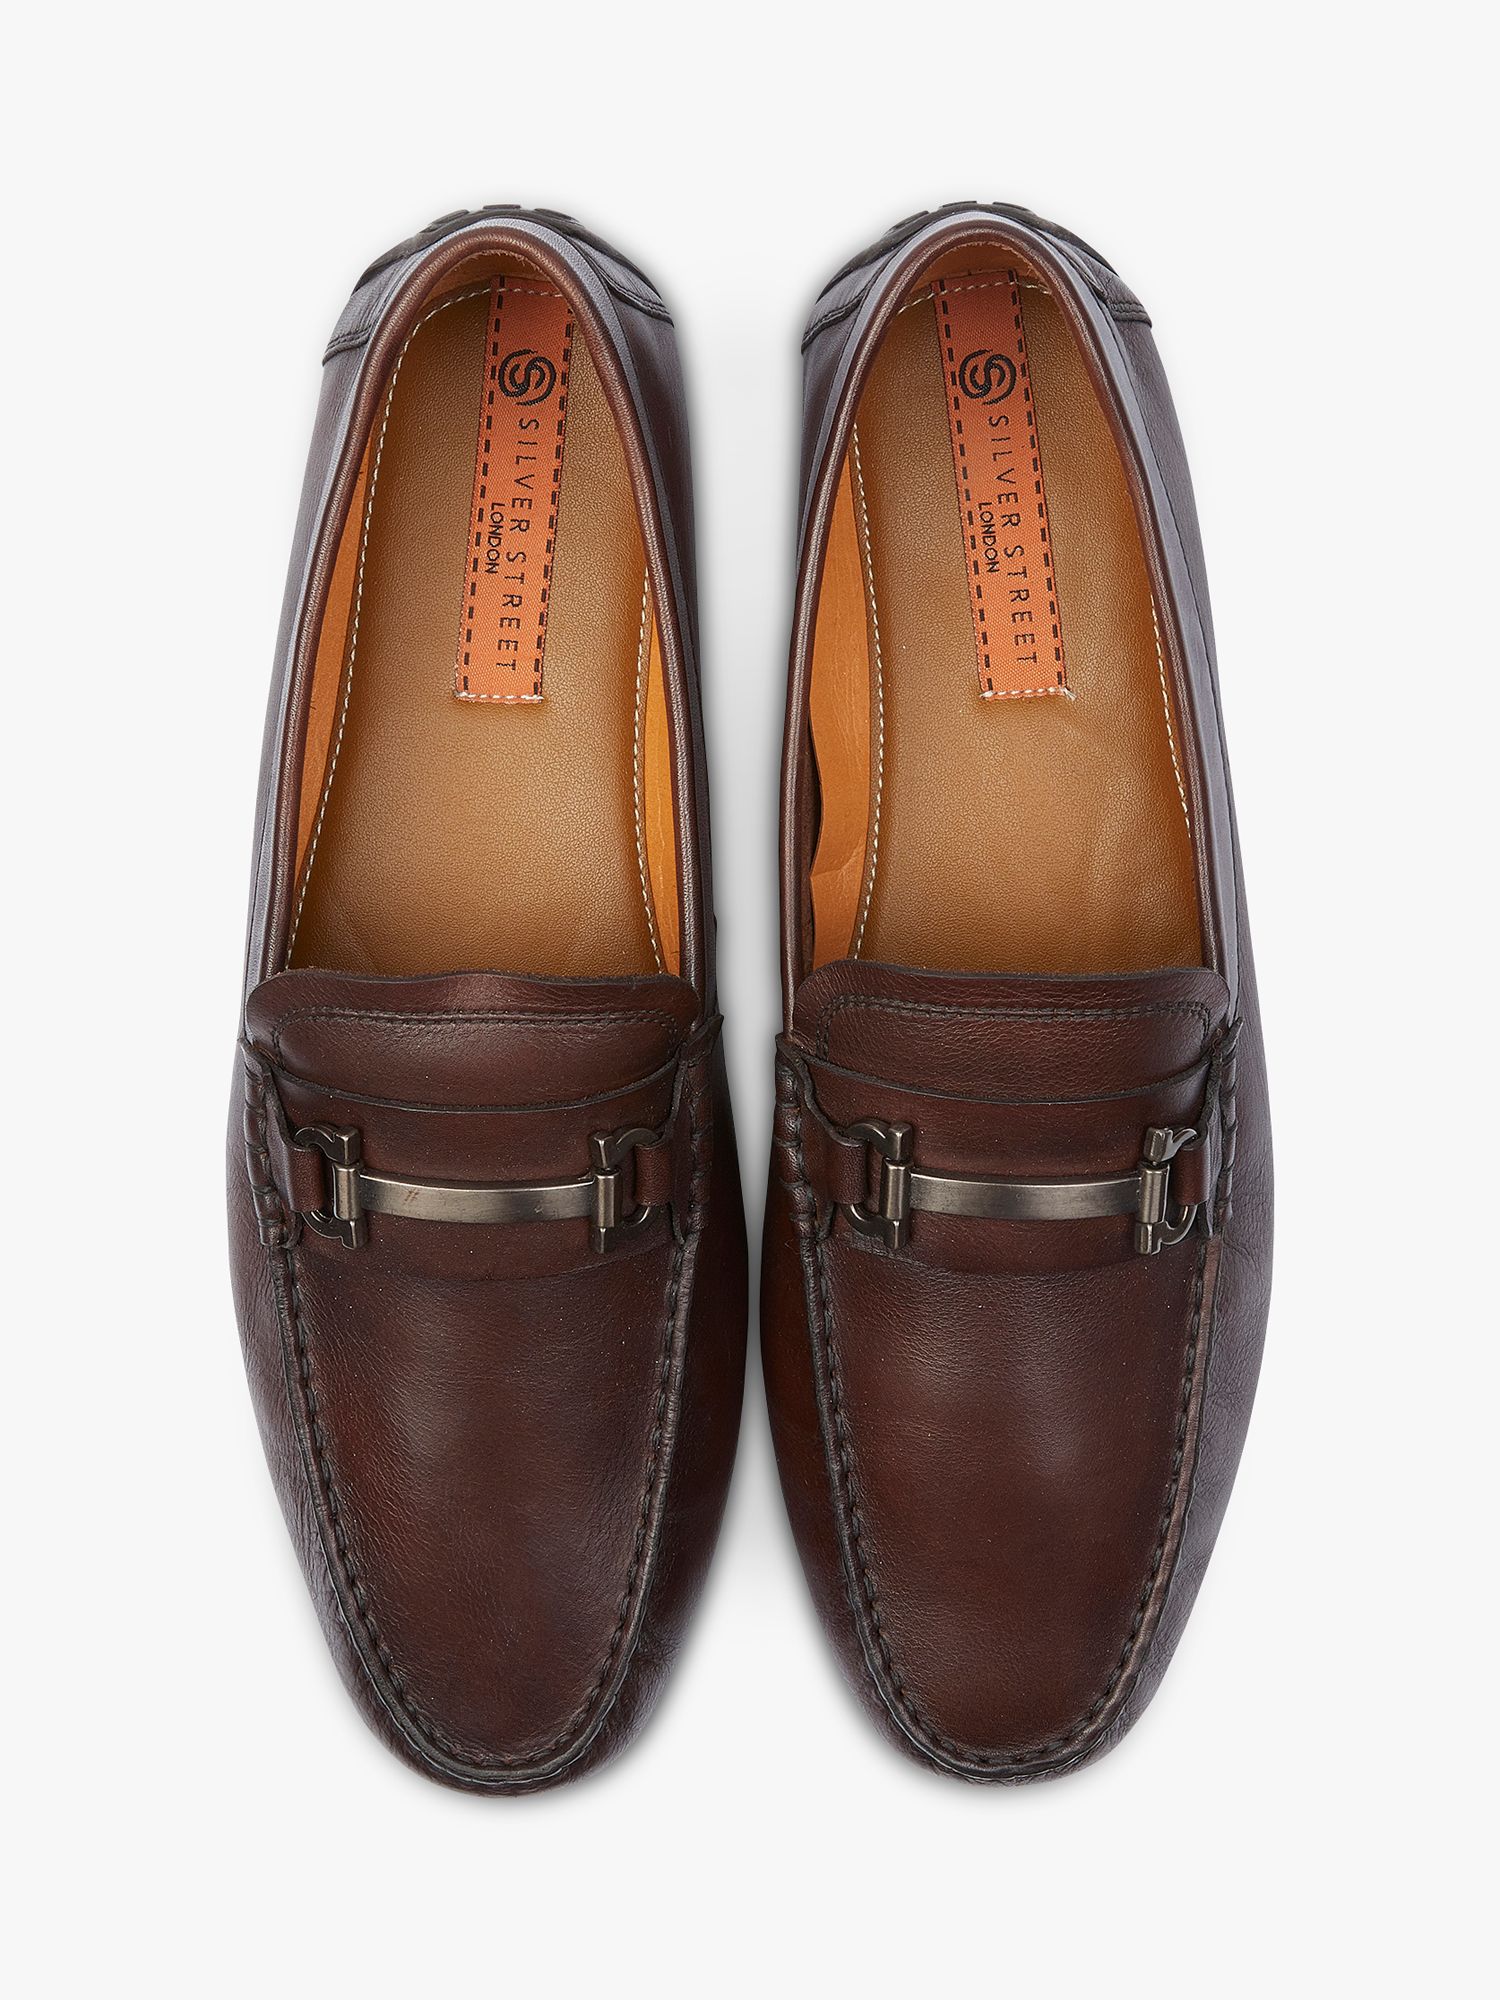 Silver Street London Austin Loafers, Brown at John Lewis & Partners